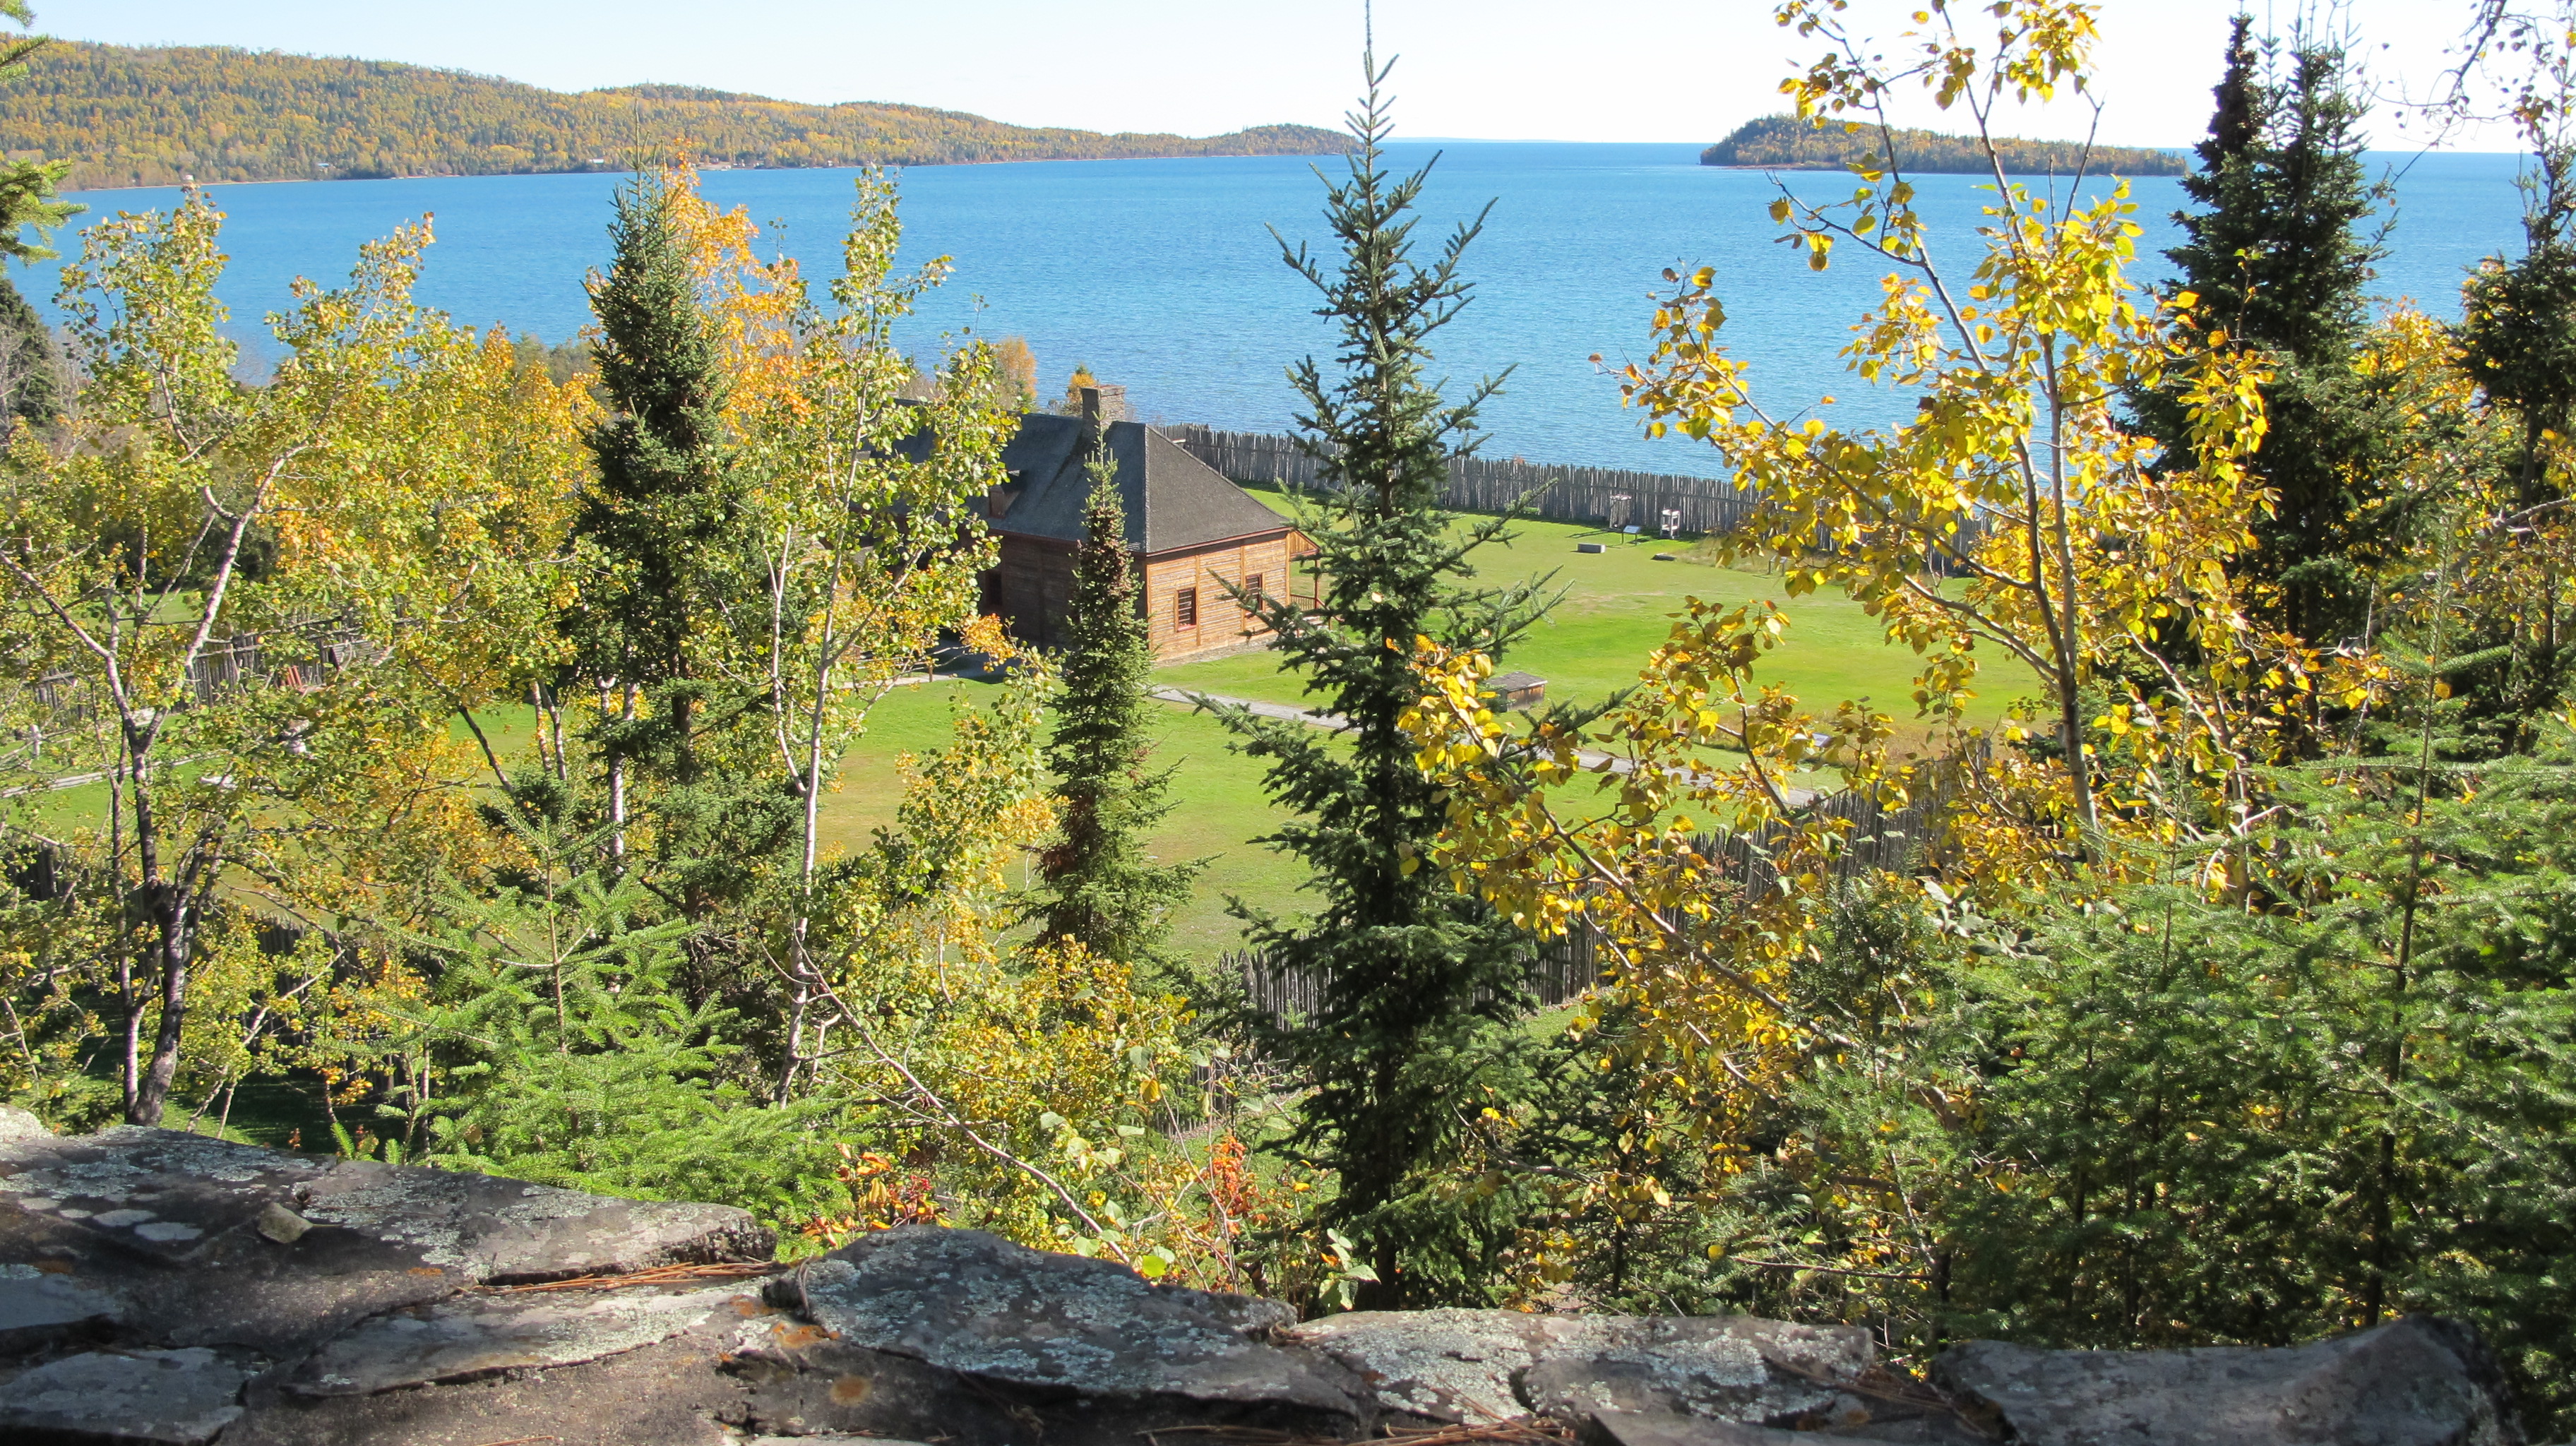 Stockade fence and log building overlooking Lake Superior